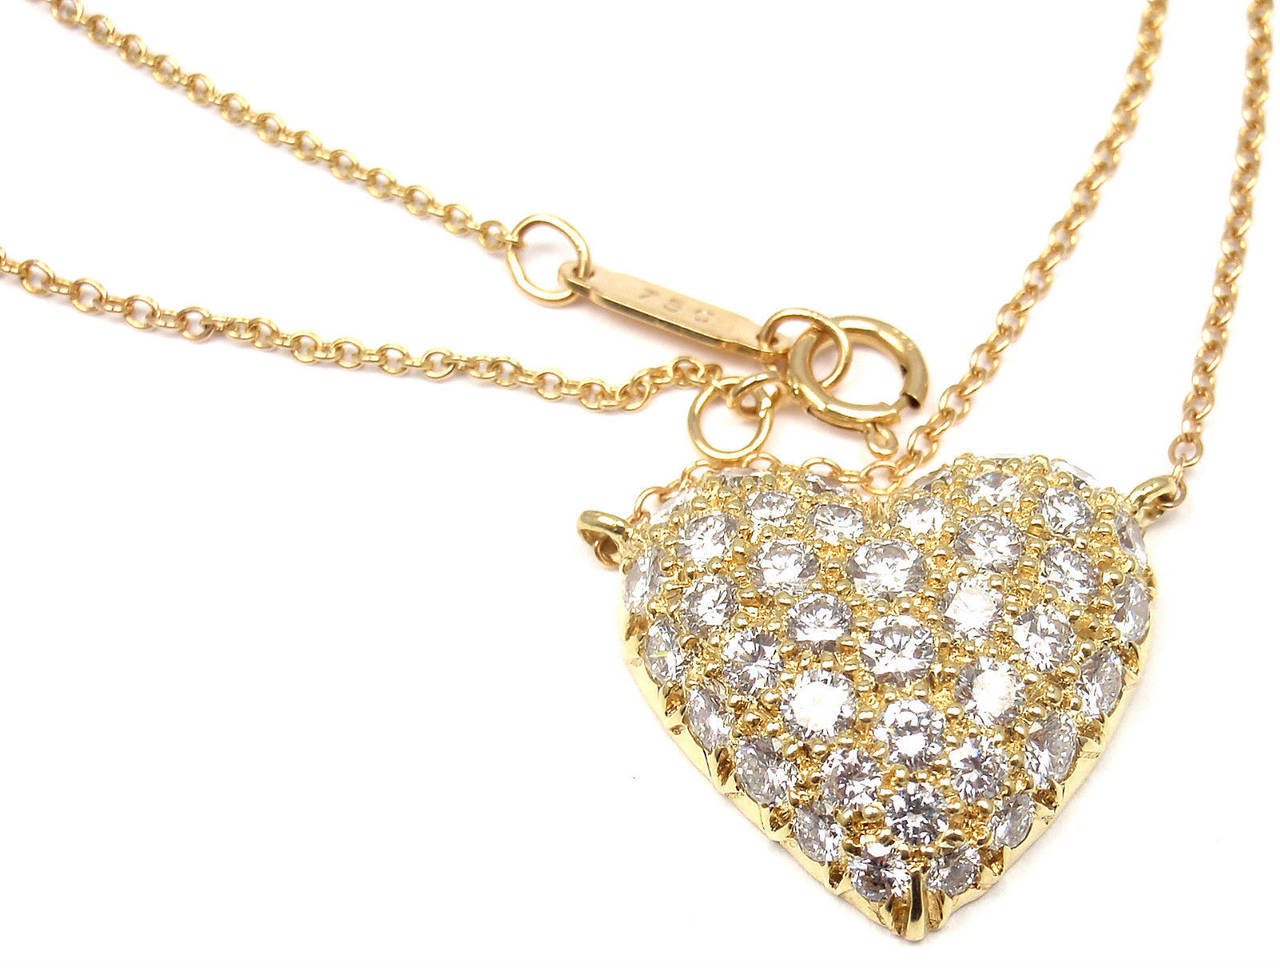 Tiffany & Co. Pave Diamond Gold Puffed Heart Pendant Necklace 1